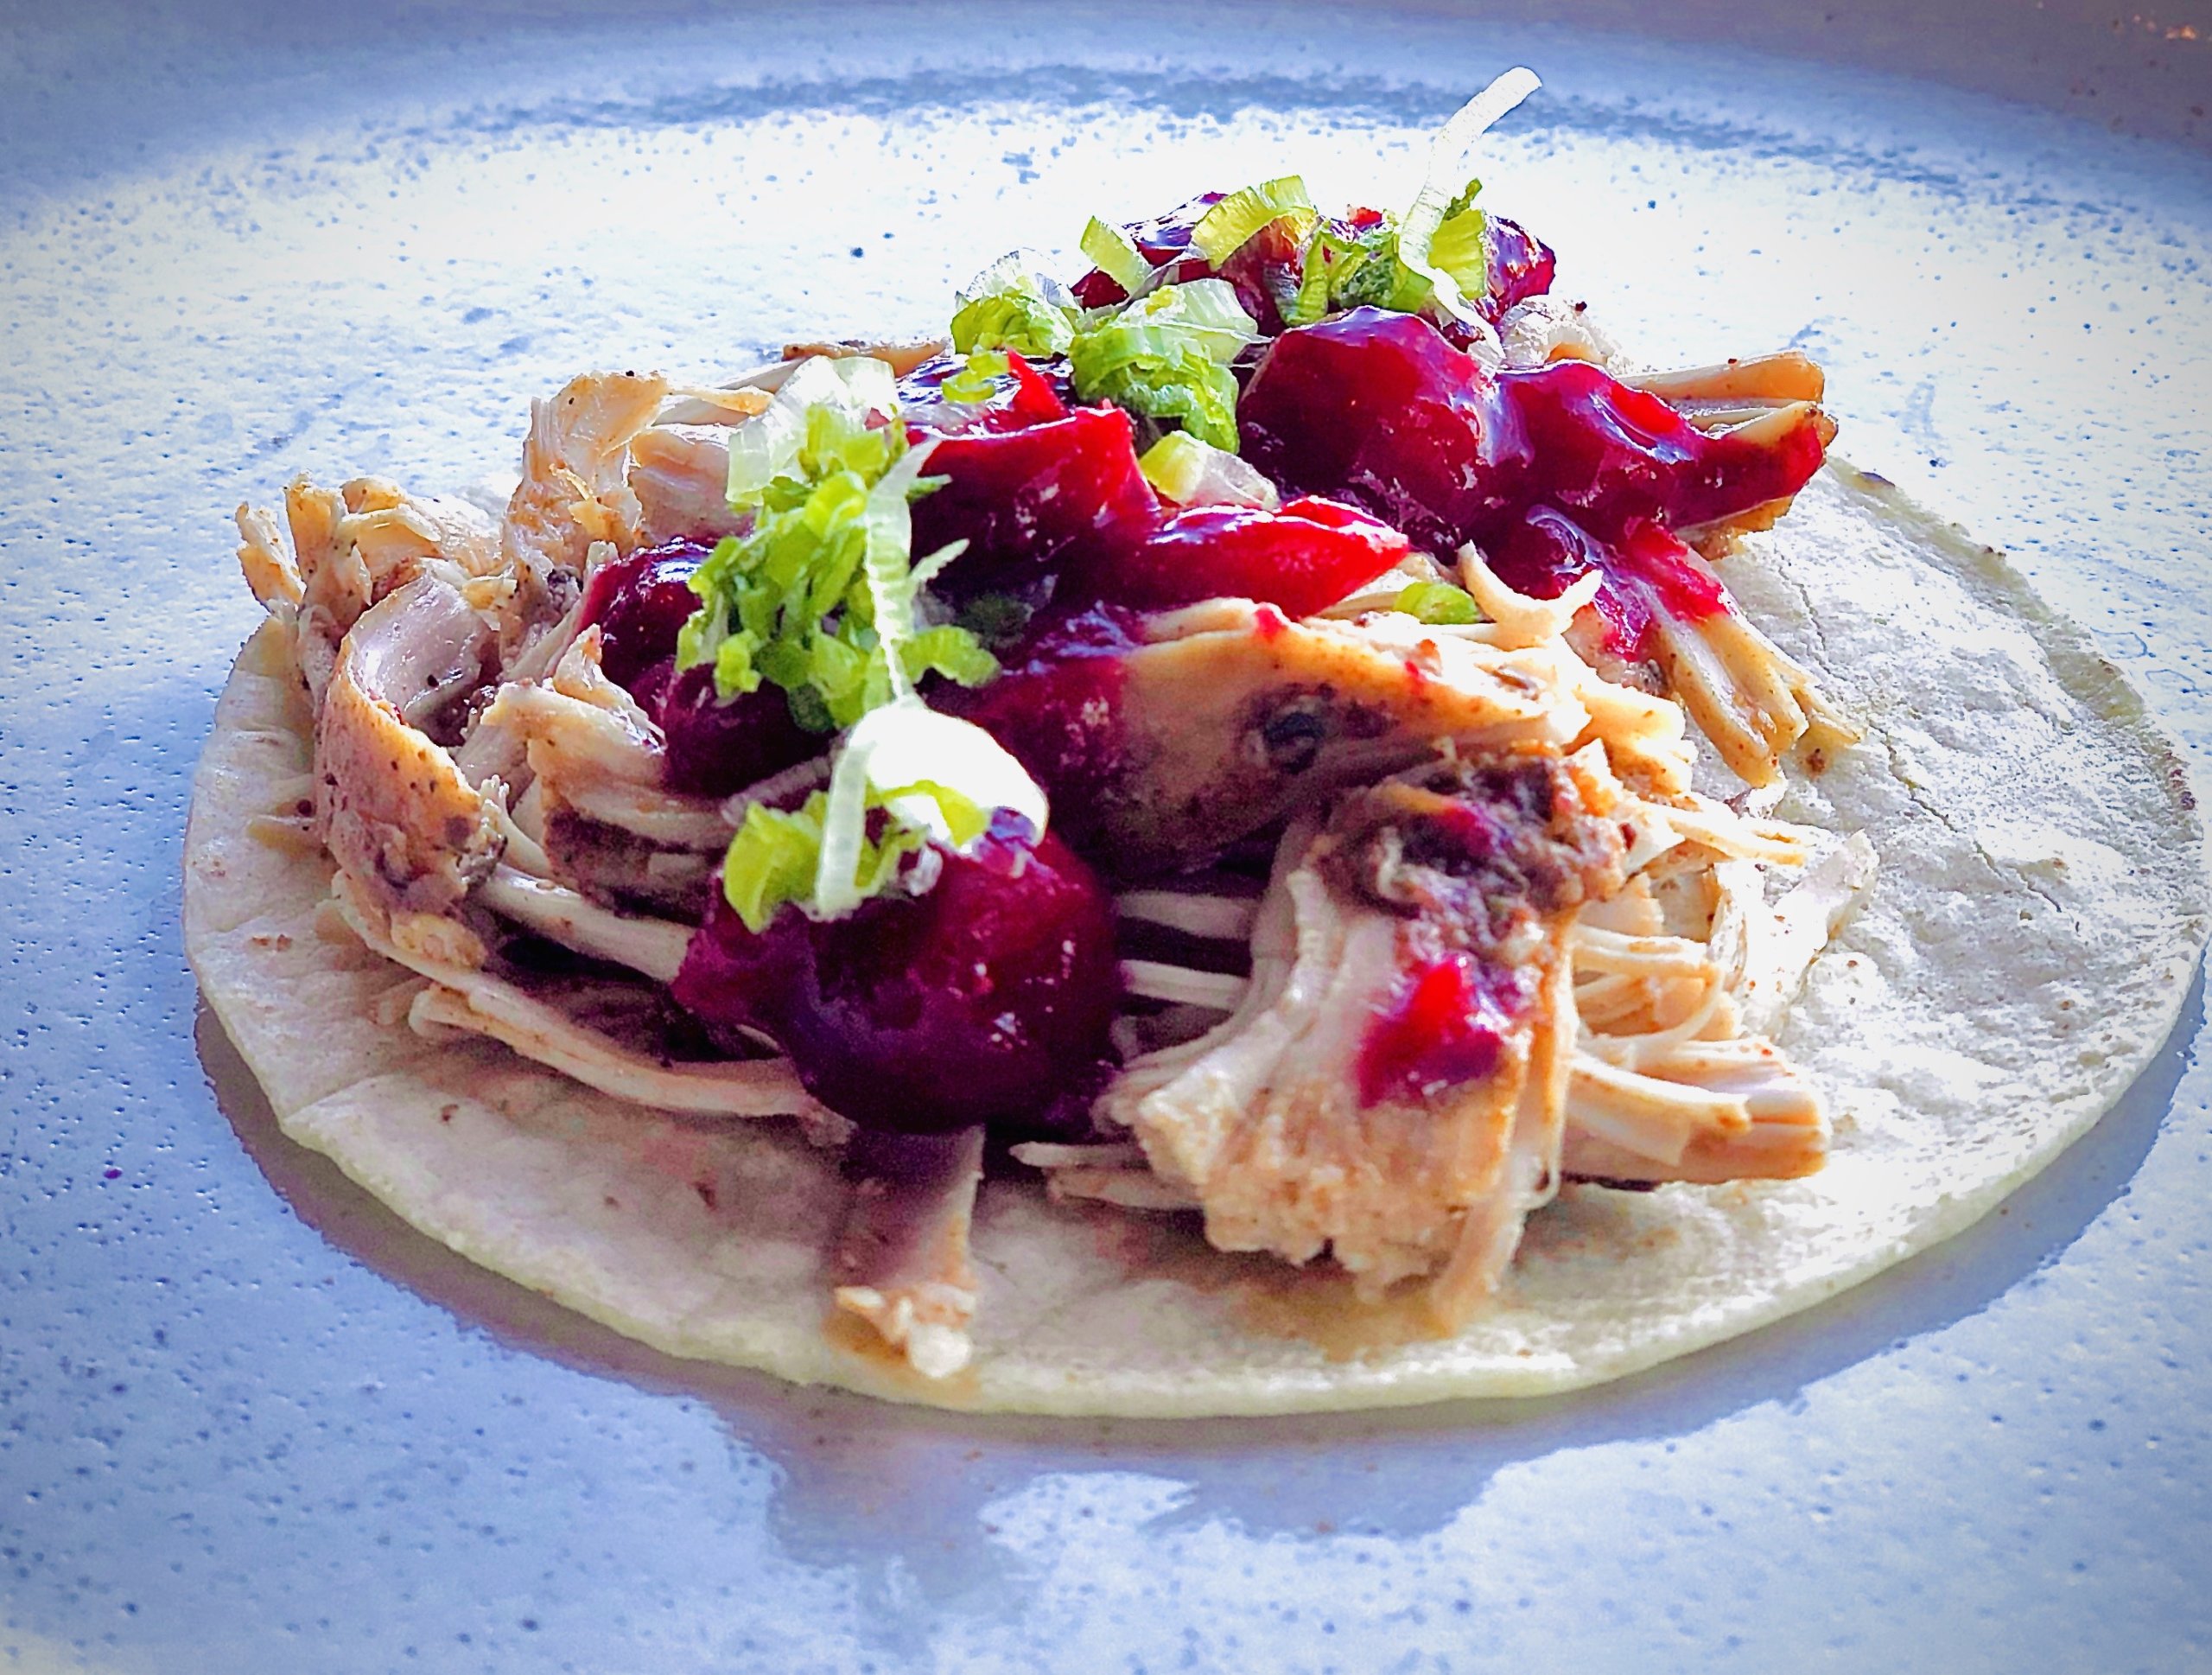 Turkey carnita taco at K Pasa is available for takeout